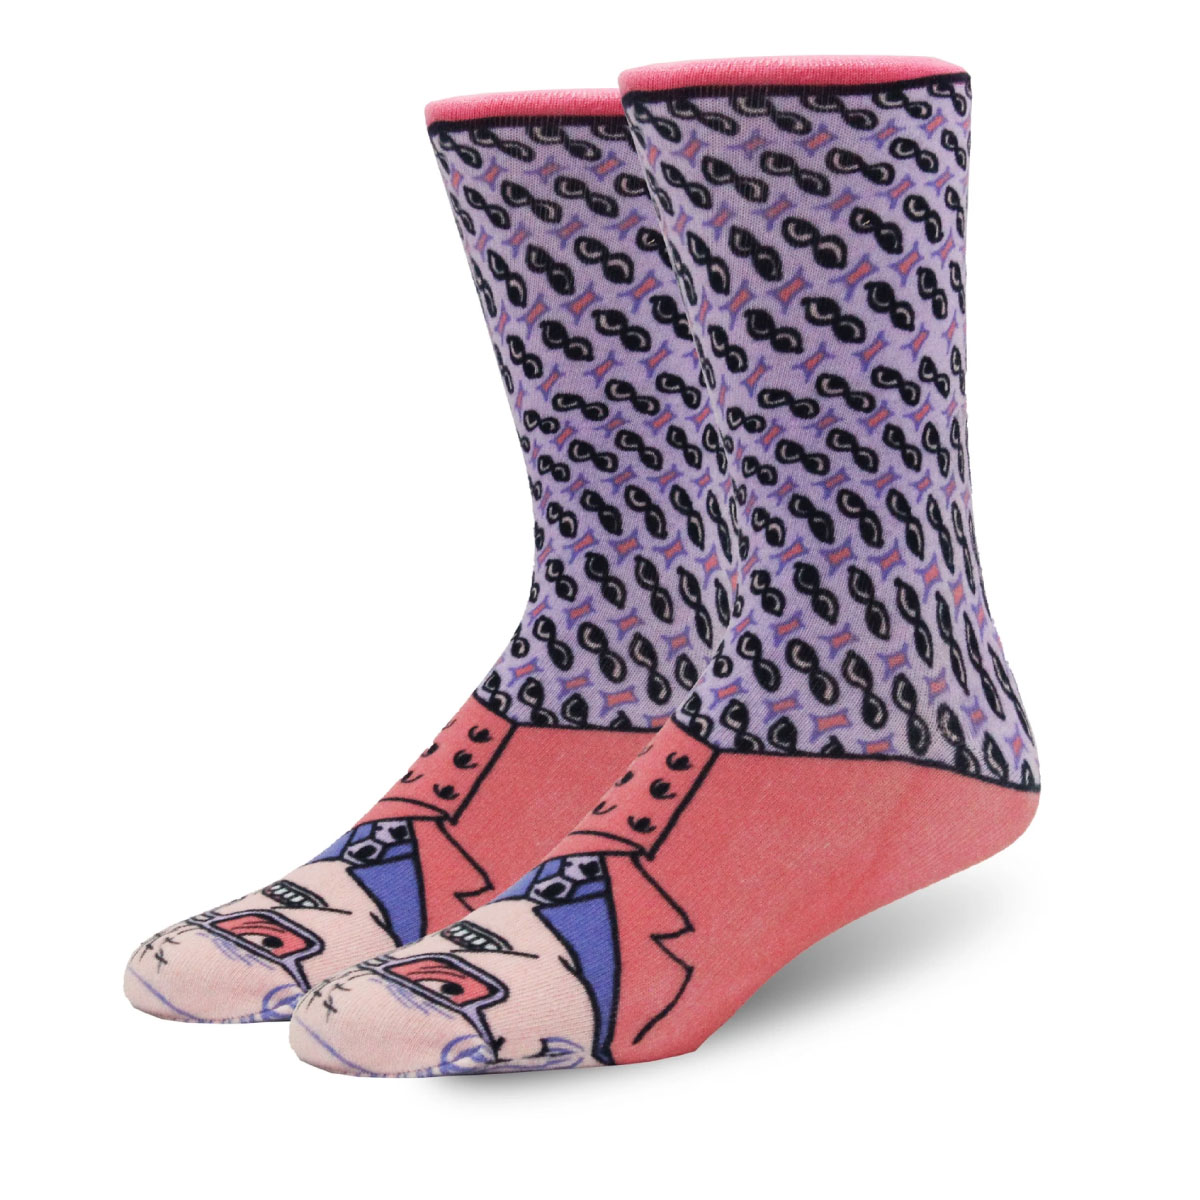 Promotional 360 Degree Print Socks | Promotion Products